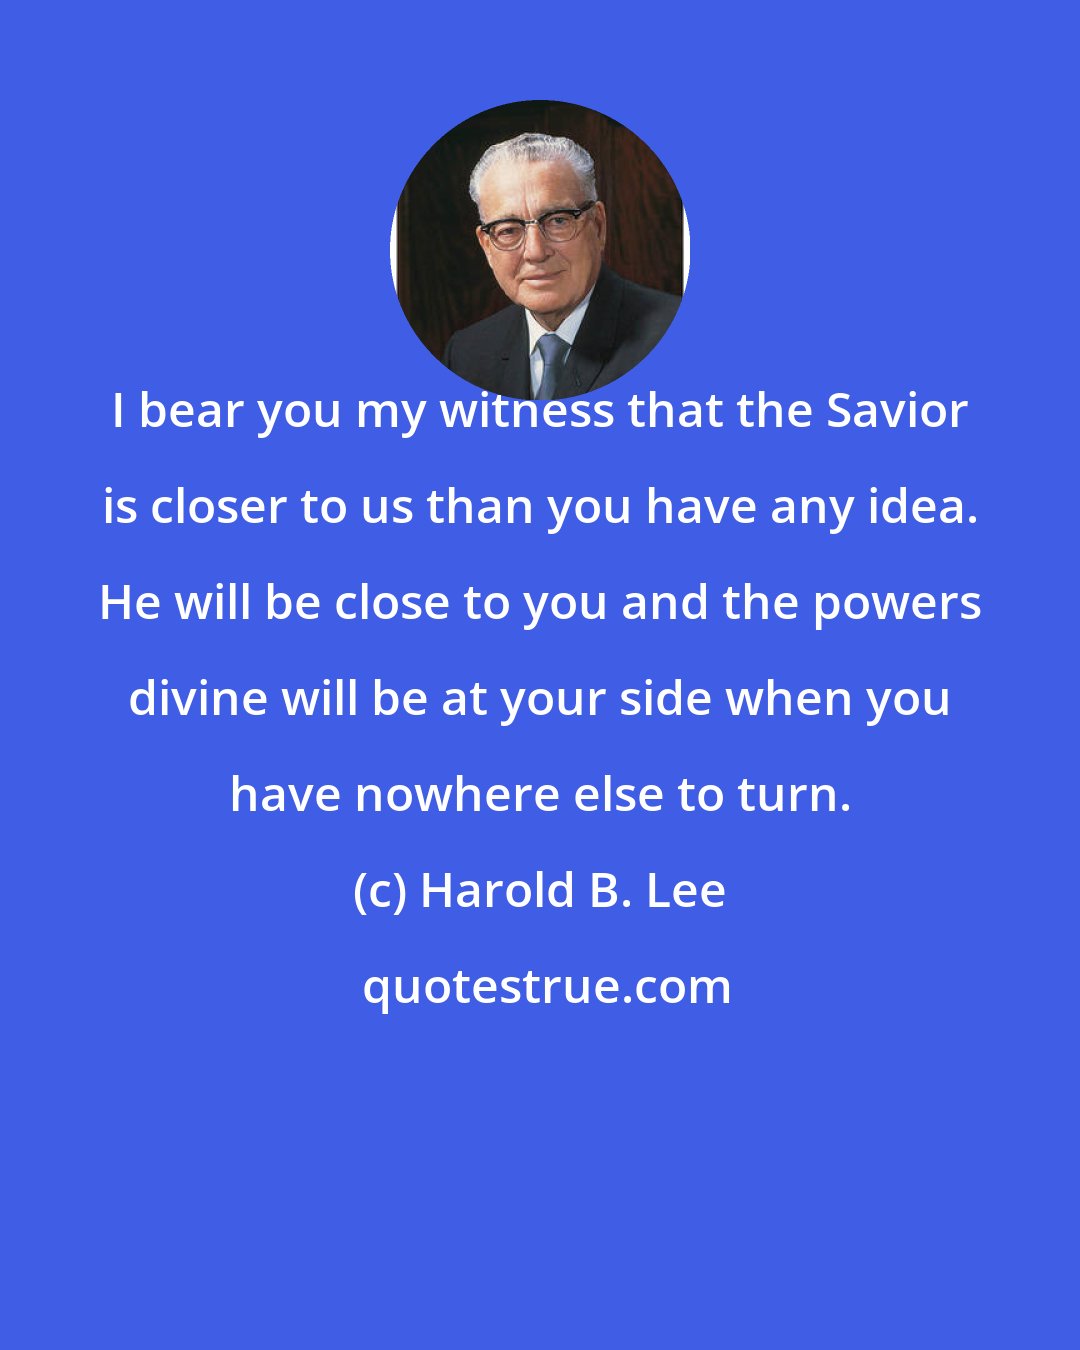 Harold B. Lee: I bear you my witness that the Savior is closer to us than you have any idea. He will be close to you and the powers divine will be at your side when you have nowhere else to turn.